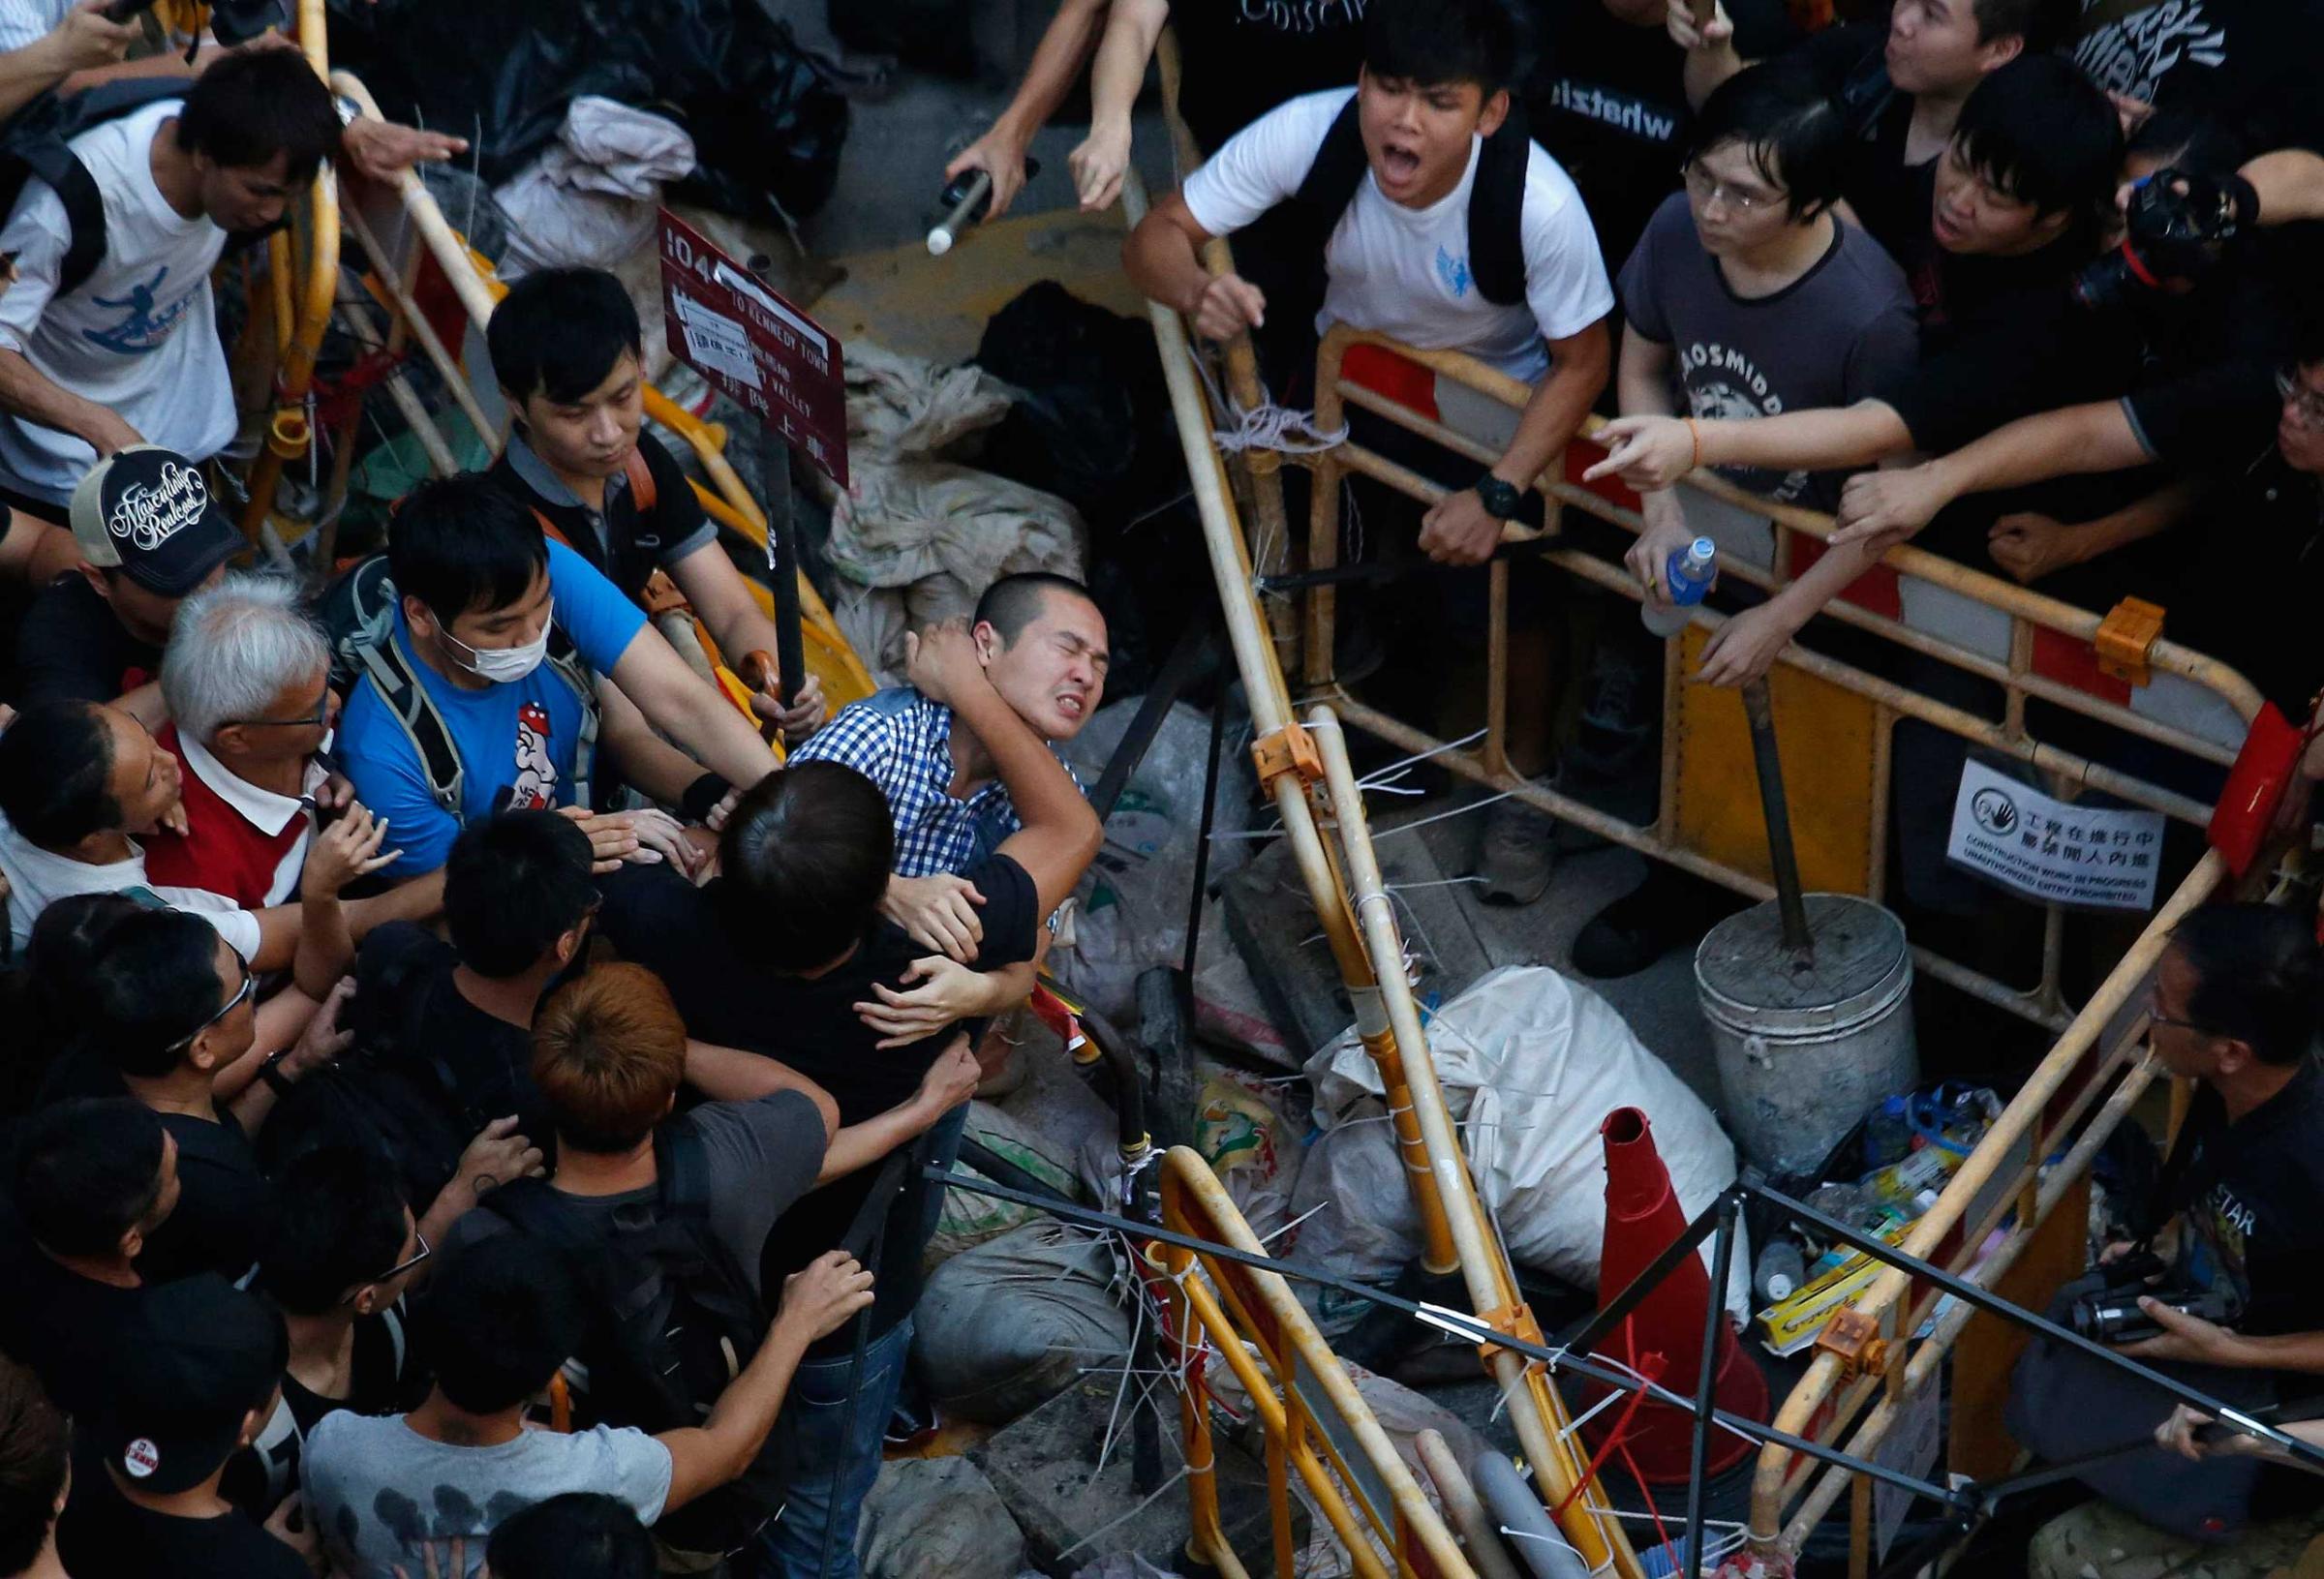 People try to prevent a man from removing a barricade set up by pro-democracy protesters blocking a main road at Hong Kong's shopping Mongkok district Oct. 4, 2014.